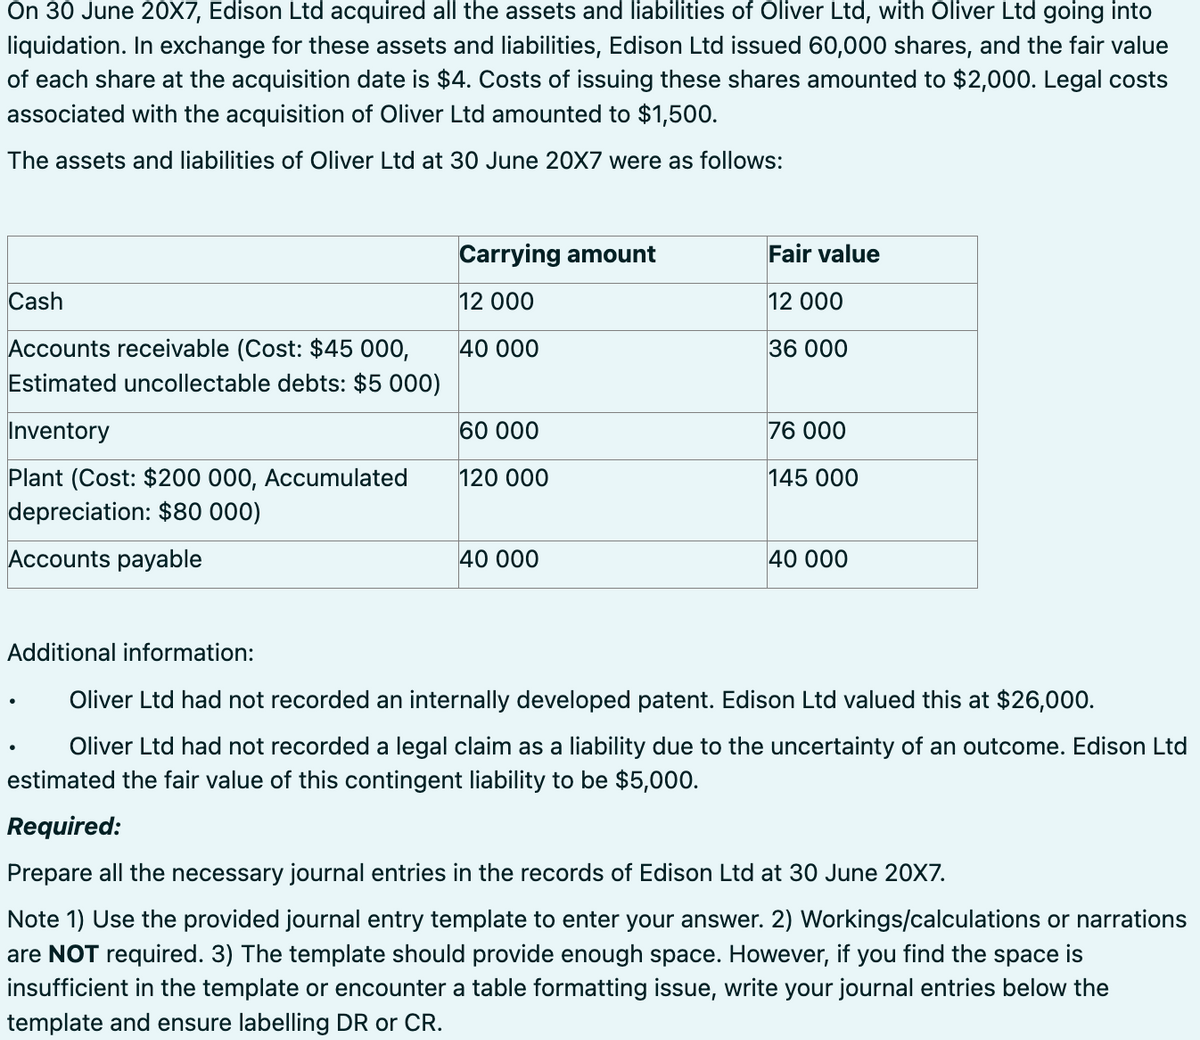 On 30 June 20X7, Edison Ltd acquired all the assets and liabilities of Oliver Ltd, with Oliver Ltd going into
liquidation. In exchange for these assets and liabilities, Edison Ltd issued 60,000 shares, and the fair value
of each share at the acquisition date is $4. Costs of issuing these shares amounted to $2,000. Legal costs
associated with the acquisition of Oliver Ltd amounted to $1,500.
The assets and liabilities of Oliver Ltd at 30 June 20X7 were as follows:
Carrying amount
Fair value
Cash
12 000
12 000
Accounts receivable (Cost: $45 000,
Estimated uncollectable debts: $5000)
40 000
36 000
Inventory
60 000
76 000
Plant (Cost: $200 000, Accumulated
120 000
145 000
depreciation: $80 000)
Accounts payable
40 000
40 000
Additional information:
•
Oliver Ltd had not recorded an internally developed patent. Edison Ltd valued this at $26,000.
Oliver Ltd had not recorded a legal claim as a liability due to the uncertainty of an outcome. Edison Ltd
estimated the fair value of this contingent liability to be $5,000.
Required:
Prepare all the necessary journal entries in the records of Edison Ltd at 30 June 20X7.
Note 1) Use the provided journal entry template to enter your answer. 2) Workings/calculations or narrations
are NOT required. 3) The template should provide enough space. However, if you find the space is
insufficient in the template or encounter a table formatting issue, write your journal entries below the
template and ensure labelling DR or CR.